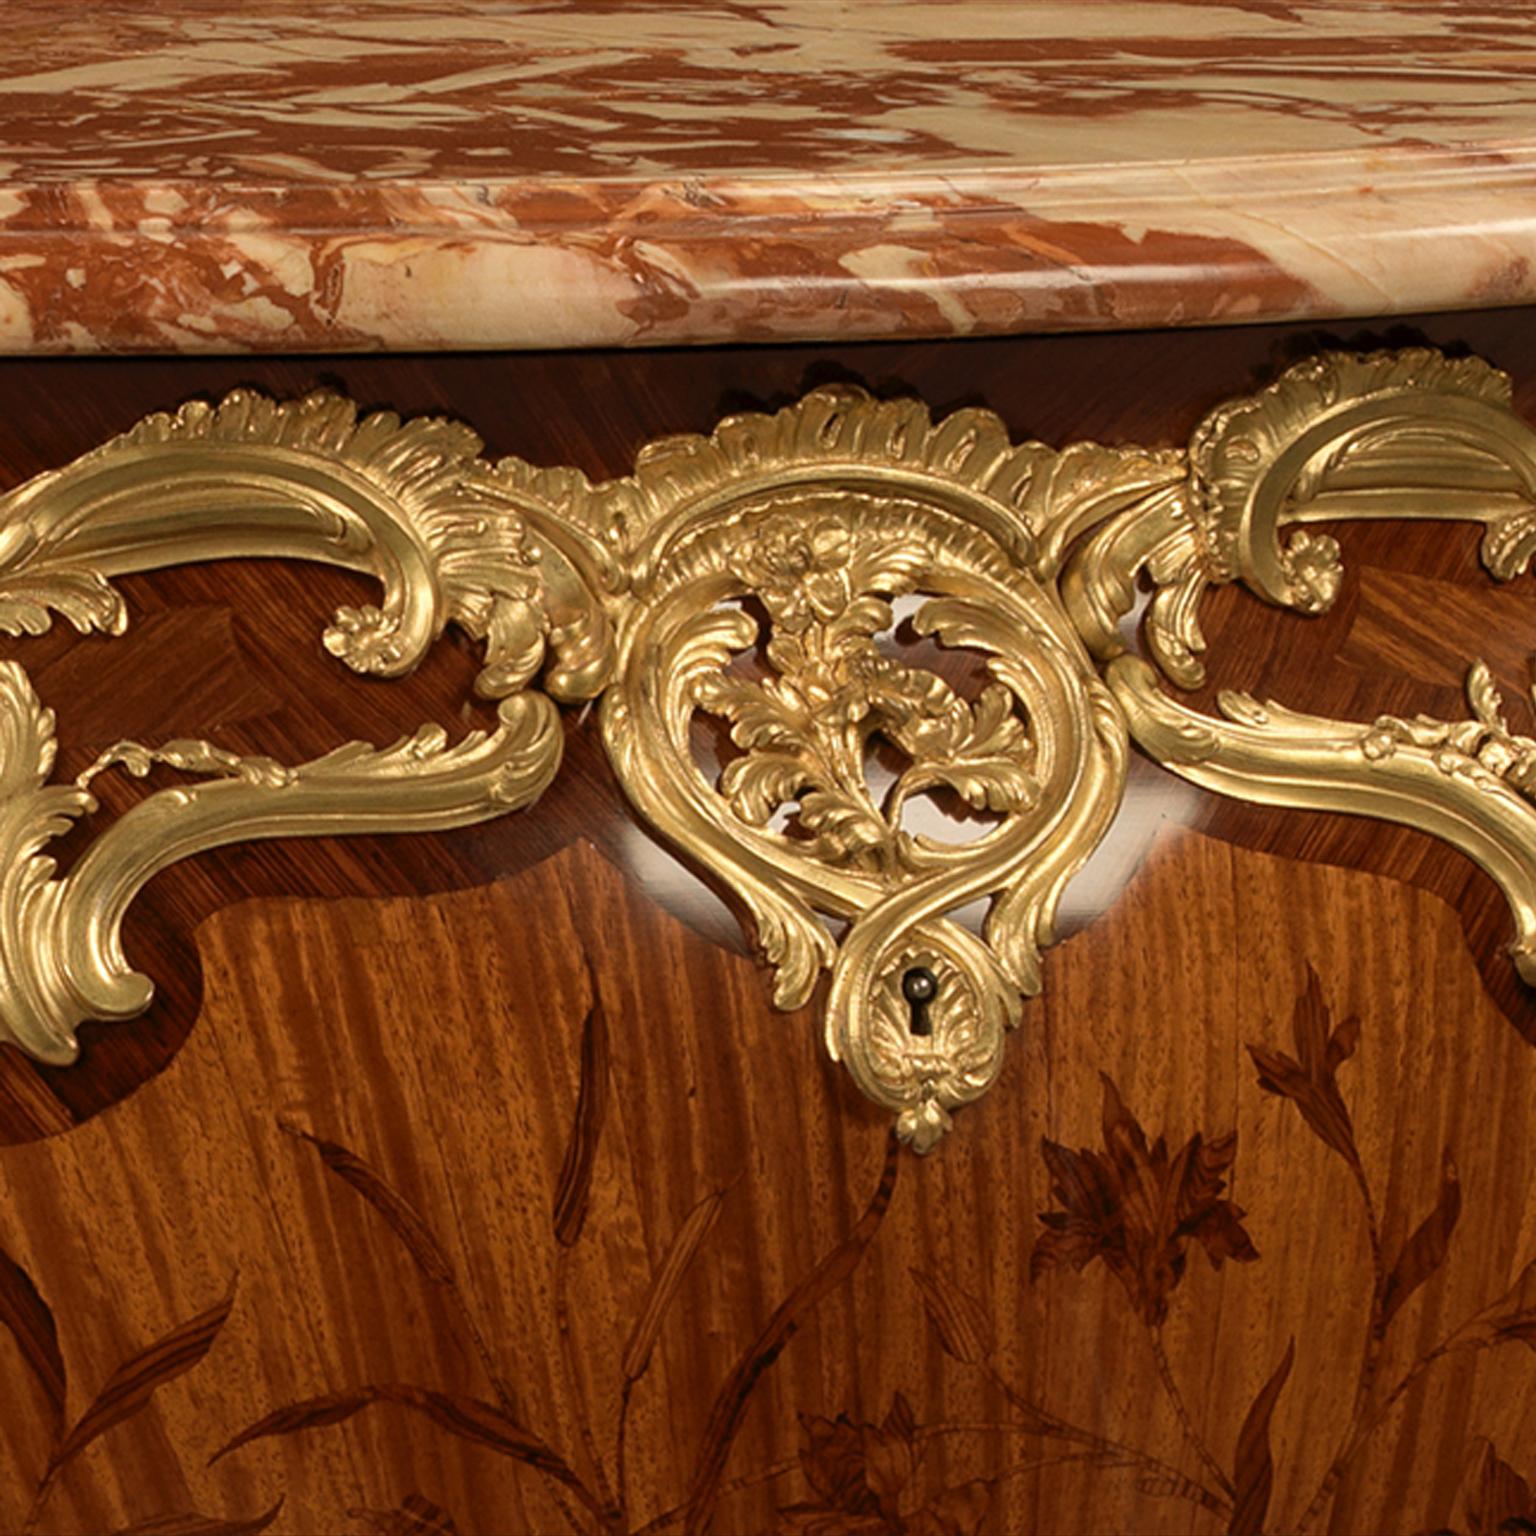 A Very Fine Marble Top Marquetry and Gilt-Bronze Commode by Emmanuel Zwiener.

The keyhole escutcheon stamped with the ‘ZN’ mark from the bronze master model.  The back of the bronzes stamped ‘NZ’.

This exceptional commode has a brèche de